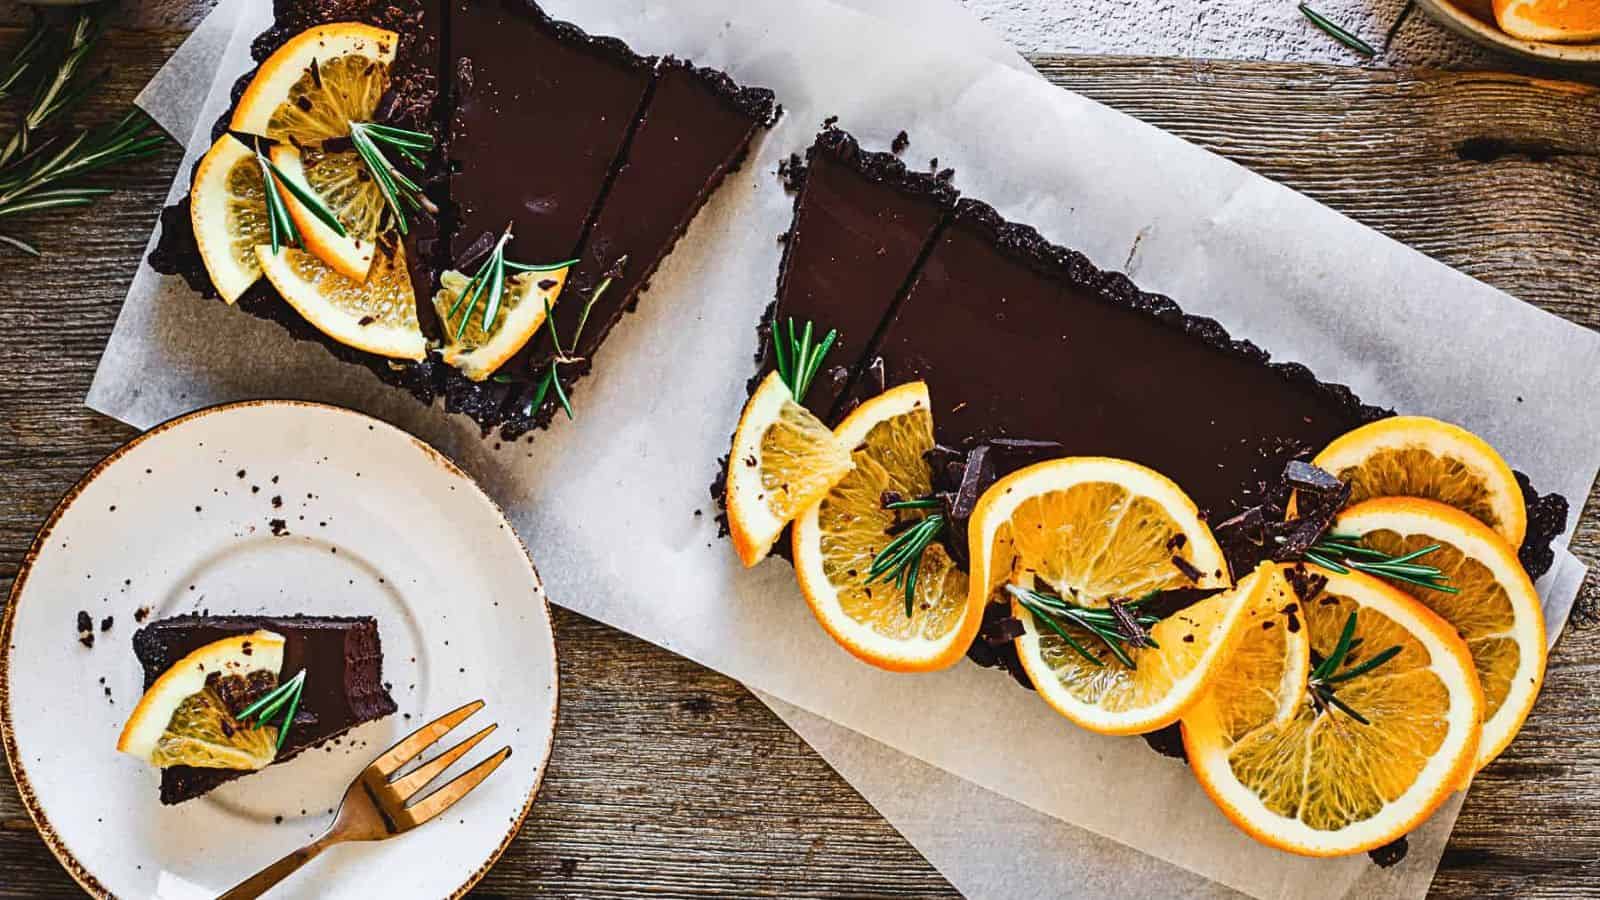 A chocolate tart with orange slices and rosemary.